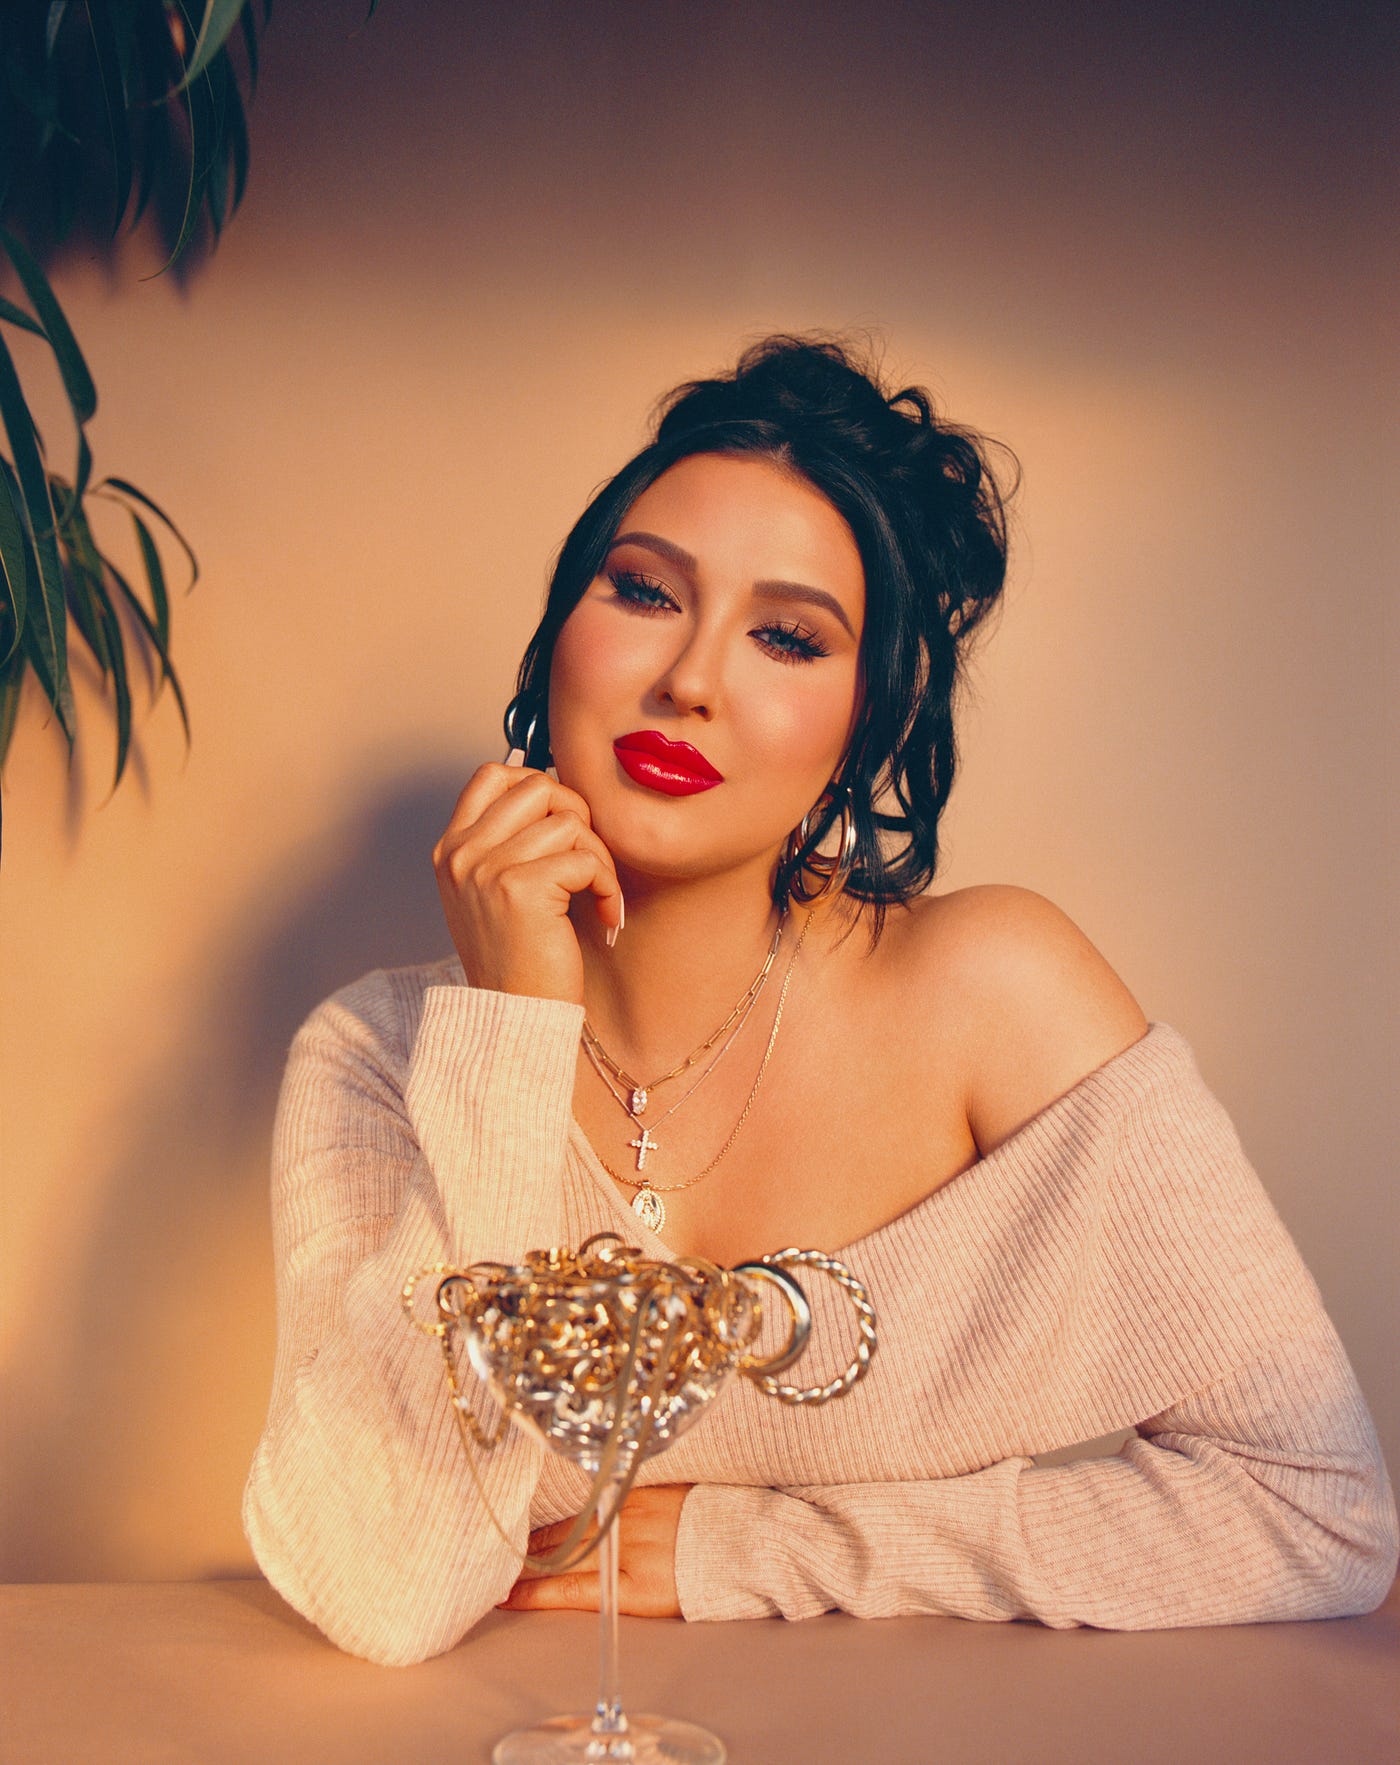 Modern Fashion: Influencer Jaclyn Hill On The 5 Things You Need To Lead a  Successful Fashion Brand Today, by Candice Georgiadis, Authority Magazine